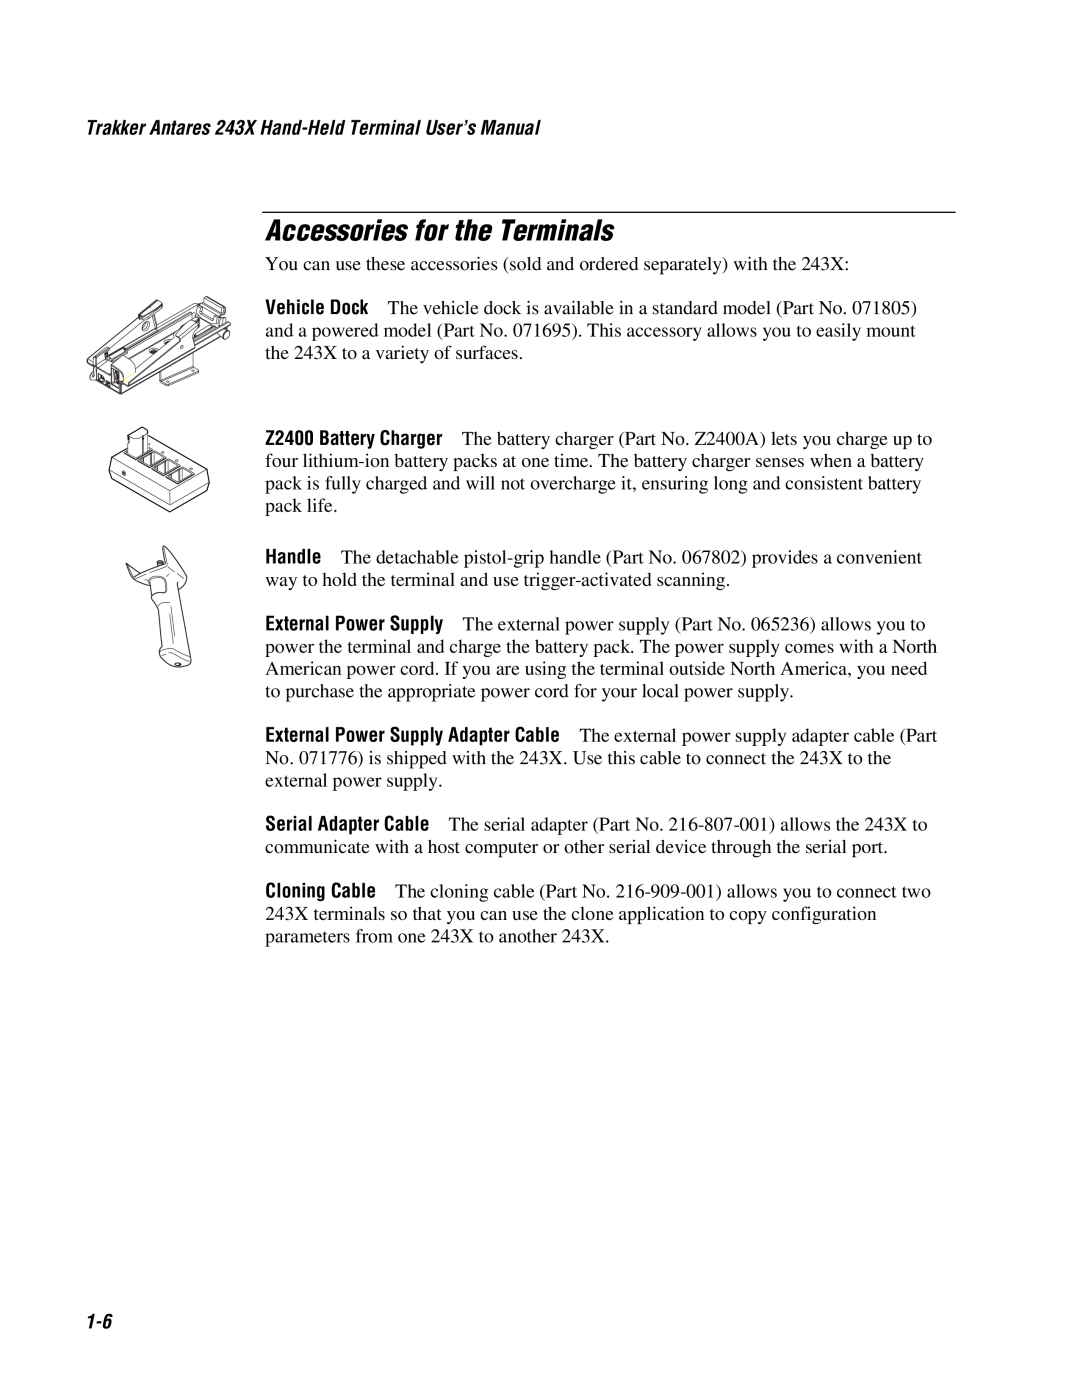 IBM user manual Accessories for the Terminals, Trakker Antares 243X Hand-Held Terminal User’s Manual 